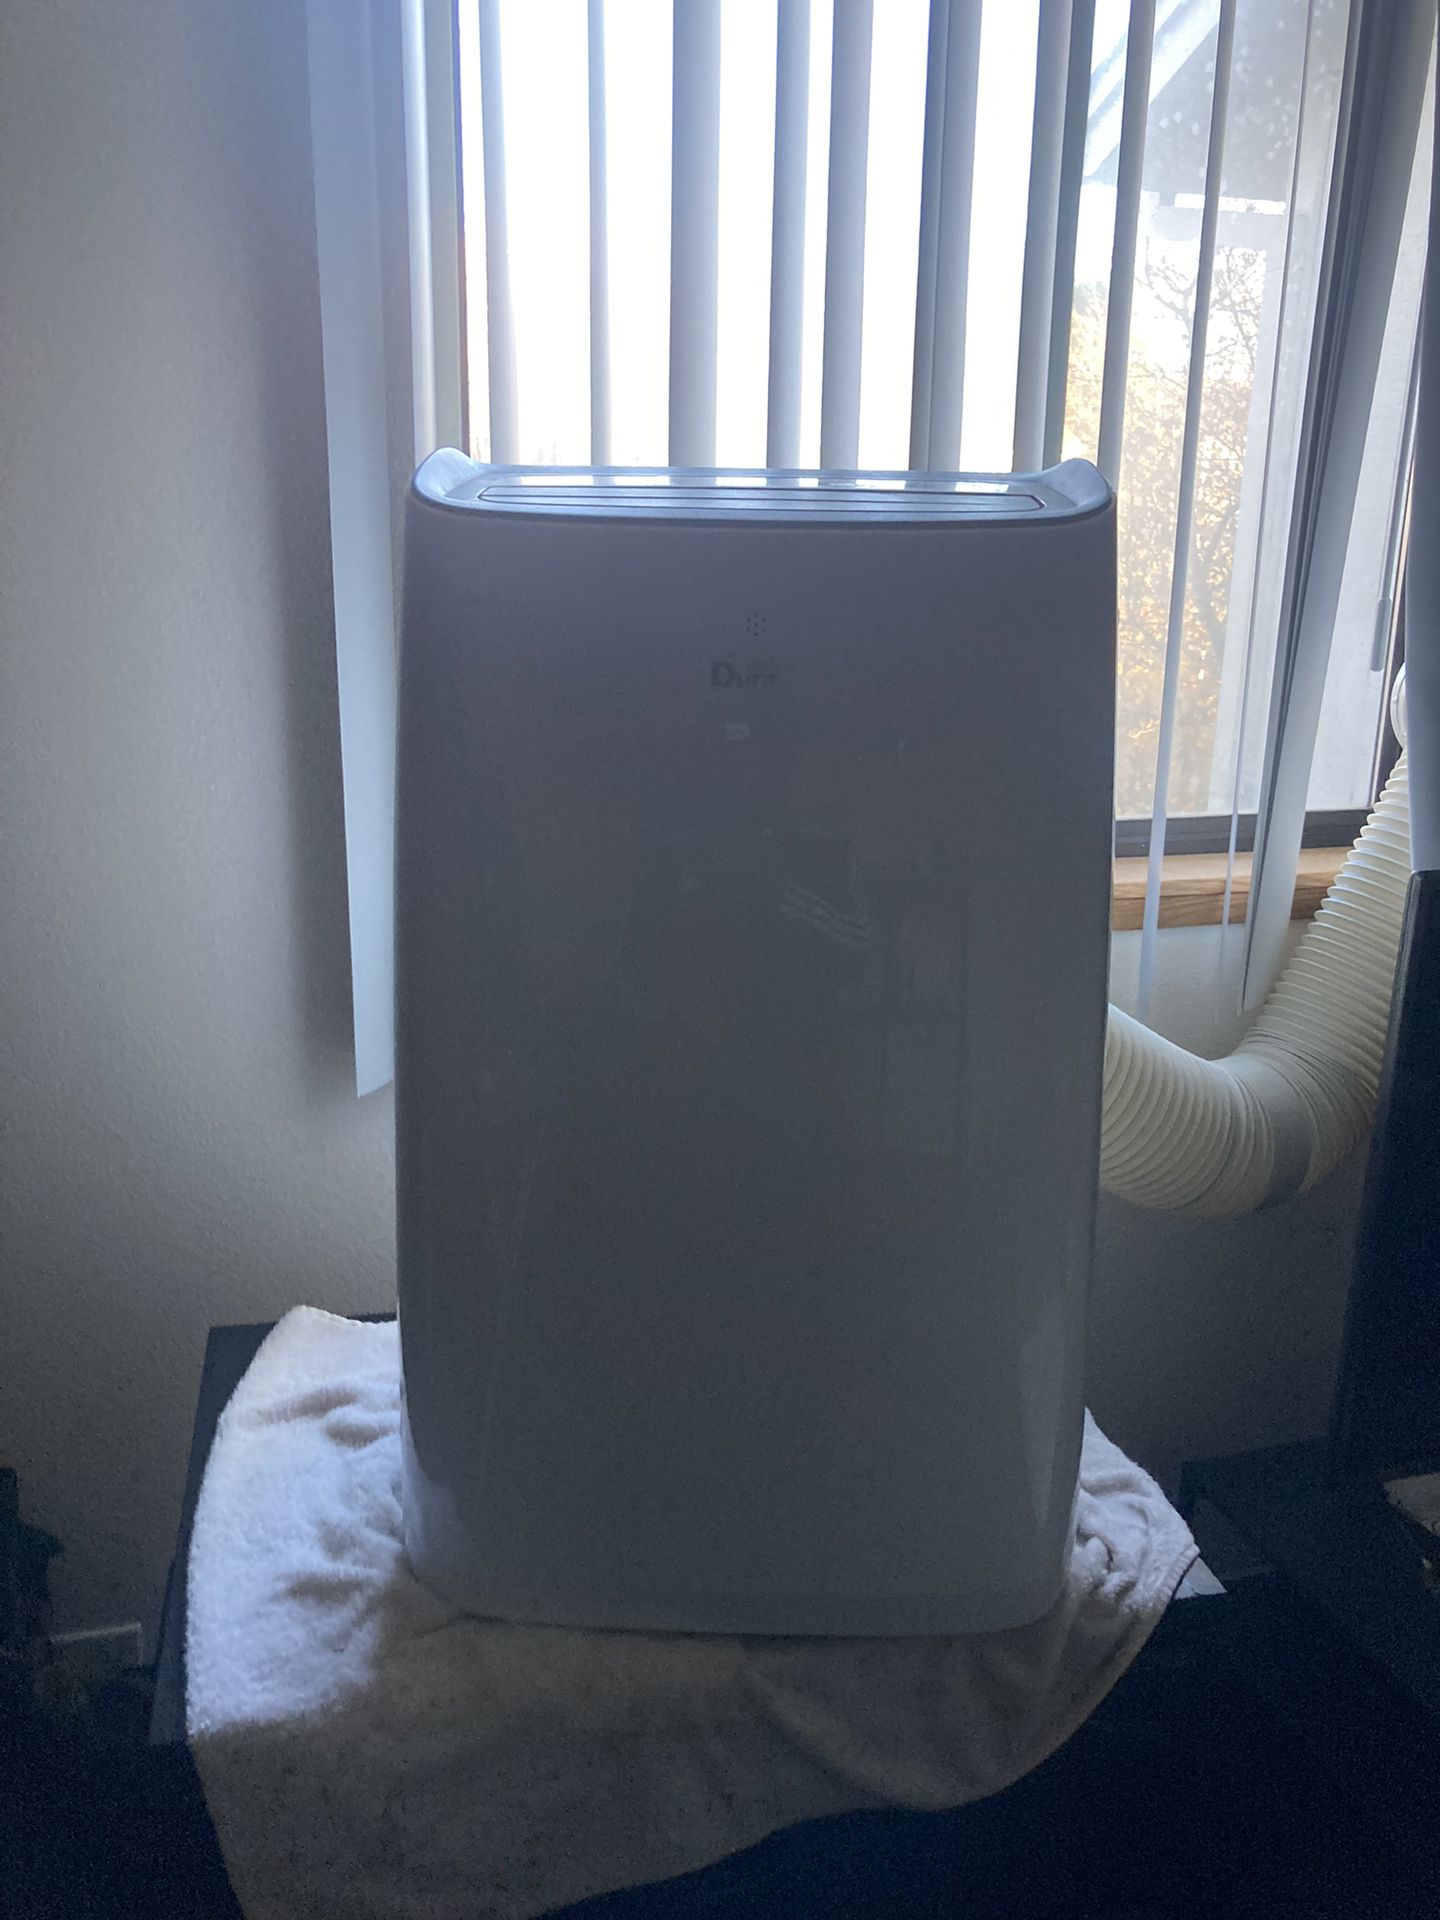 Portable Heater, Humidifier, Fan, And Ac Unit